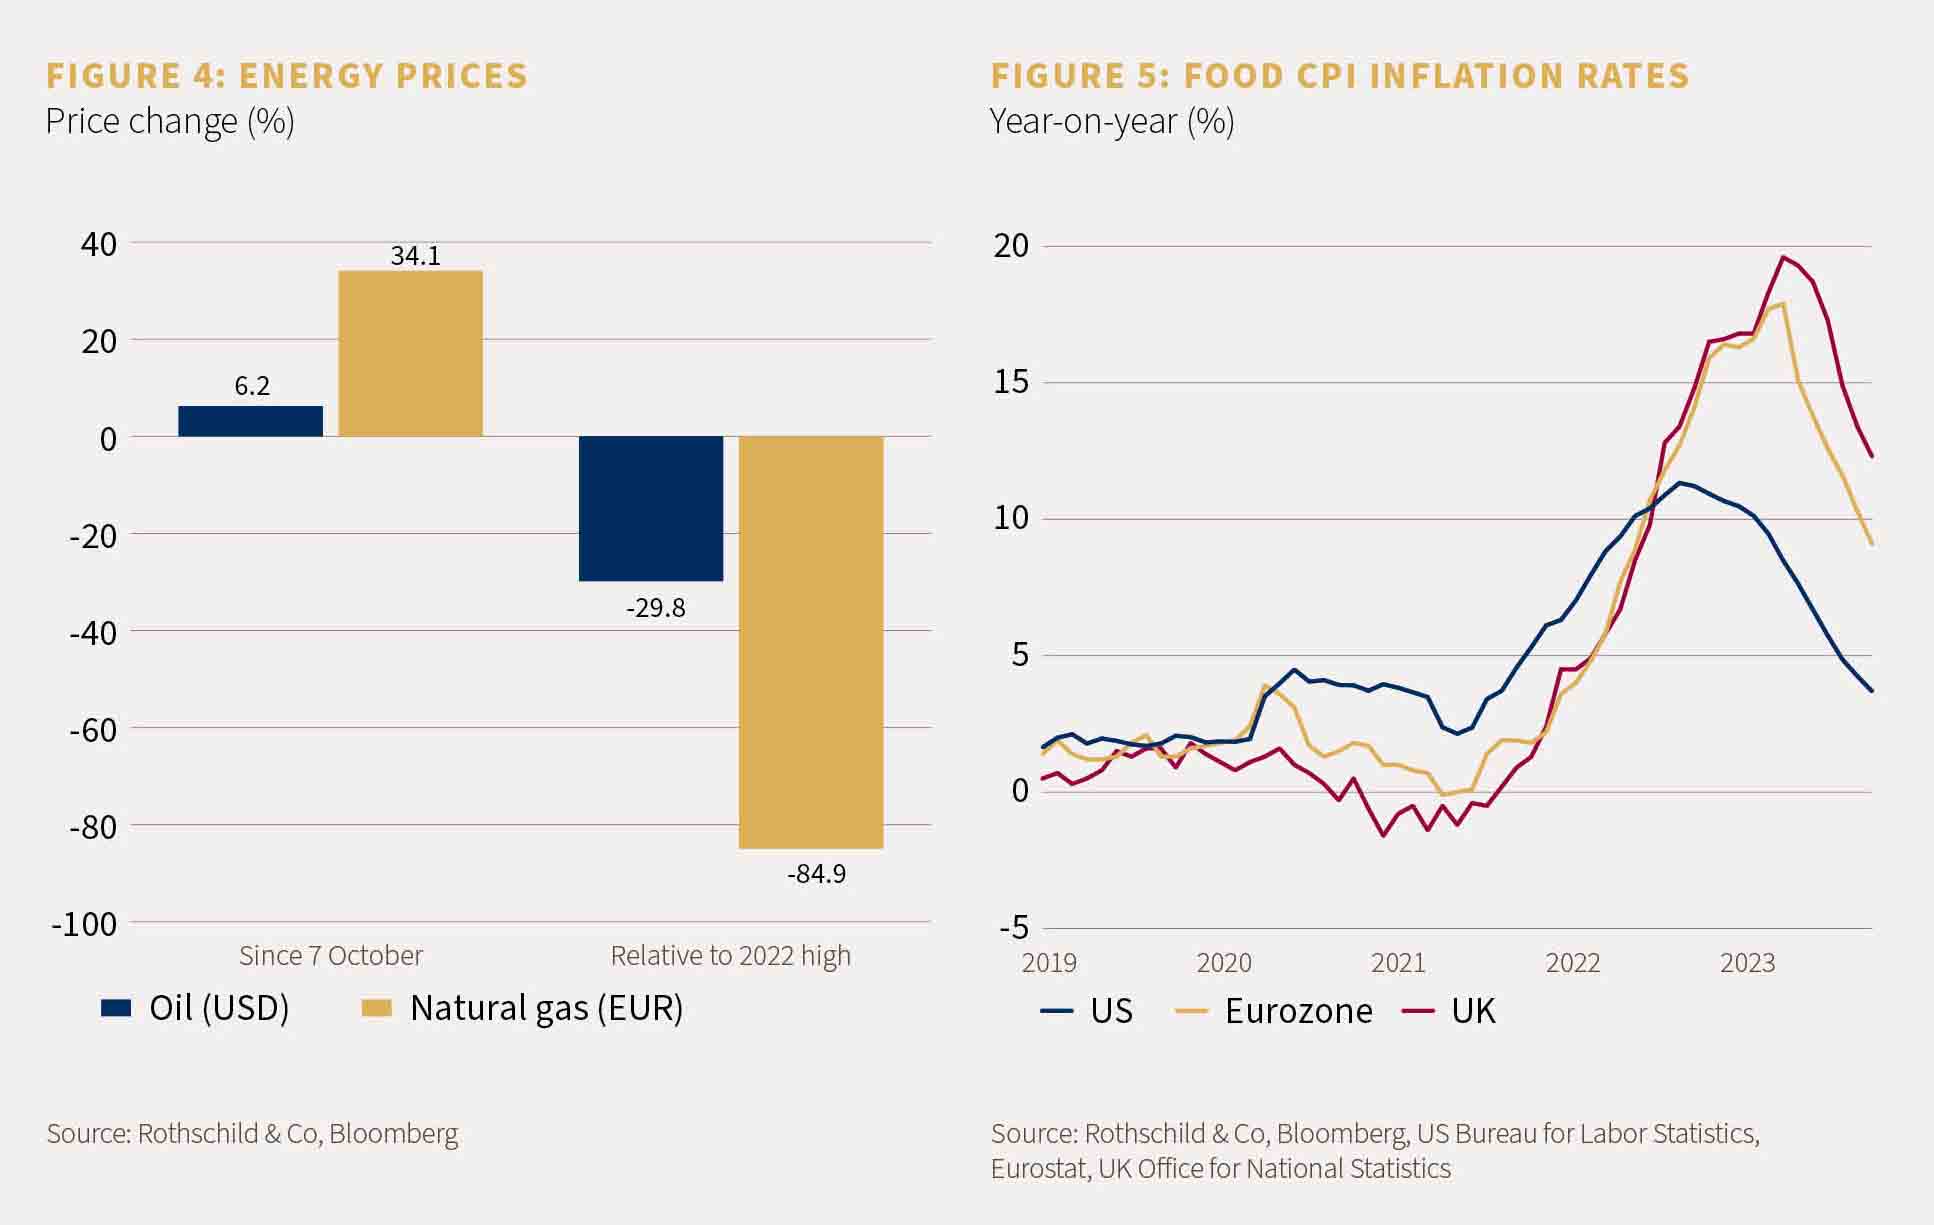 Two charts, one showing the price changes in oil and natural gas, and one showing food CPI inflation rates year-on-year